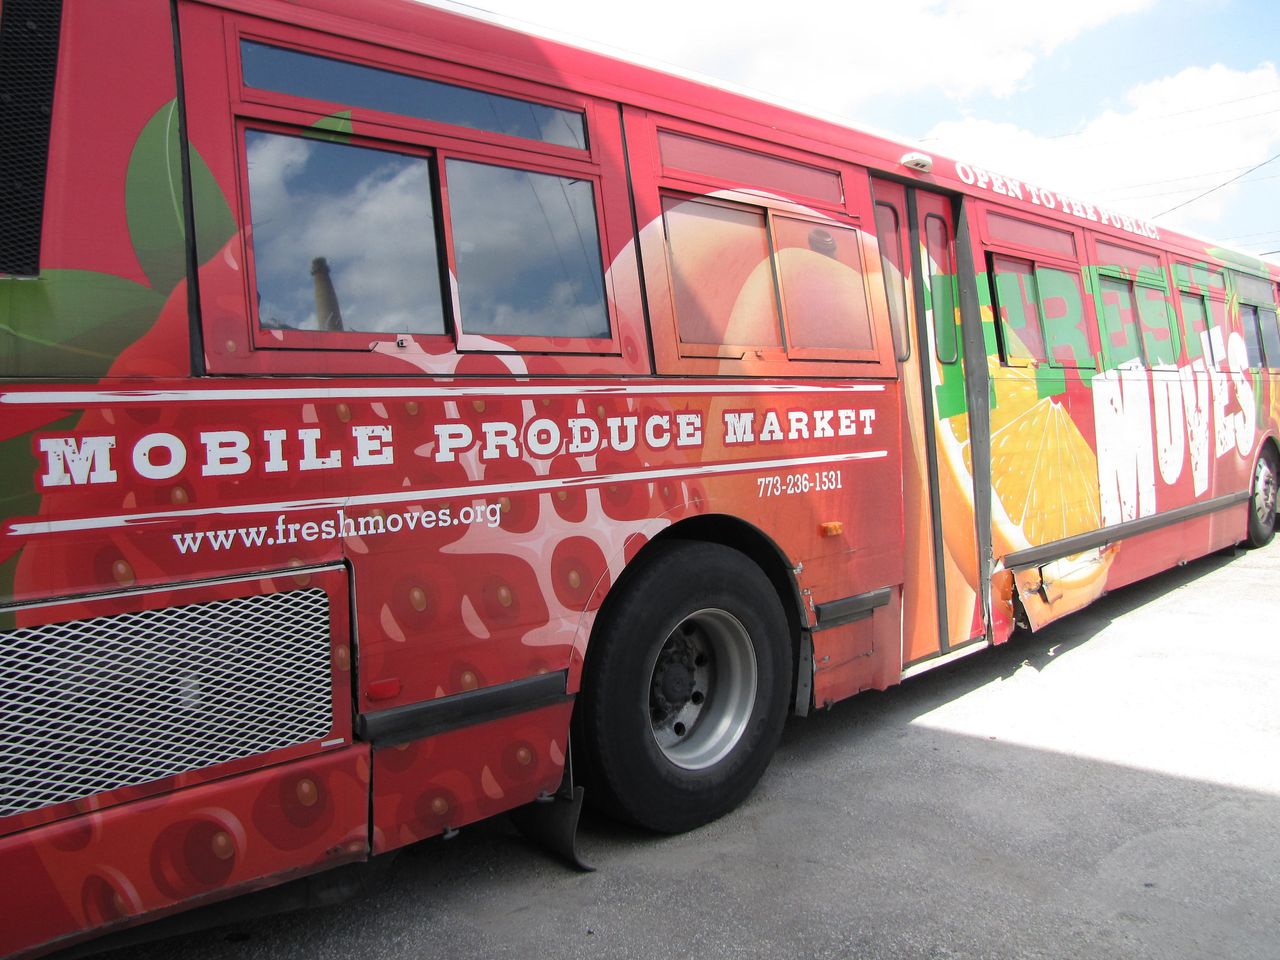 One of the early Fresh Moves mobile farmer’s markets, installed in a decommissioned public bus.